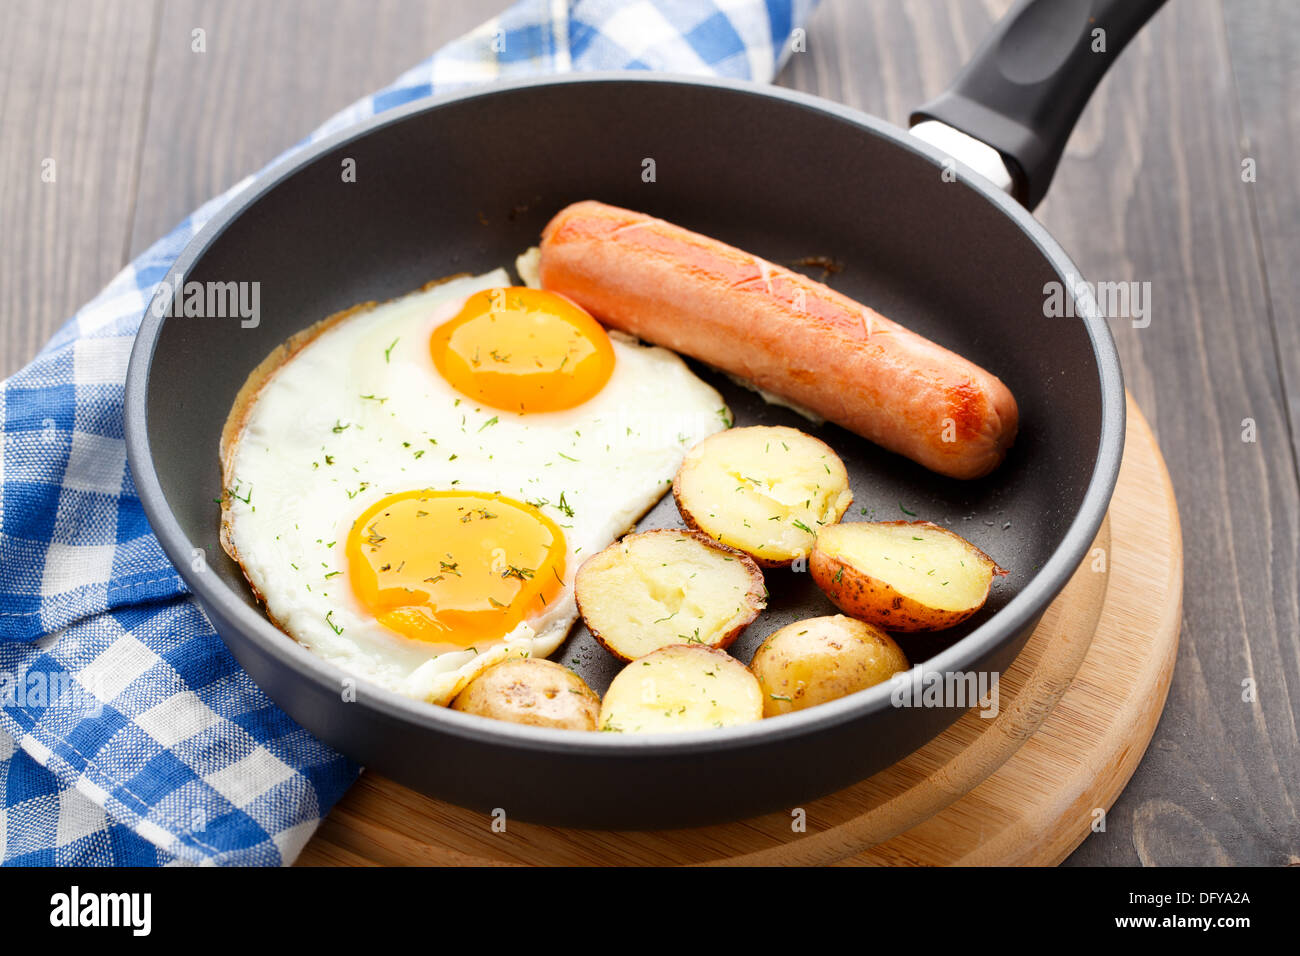 Breakfast with eggs, sausage and potato Stock Photo